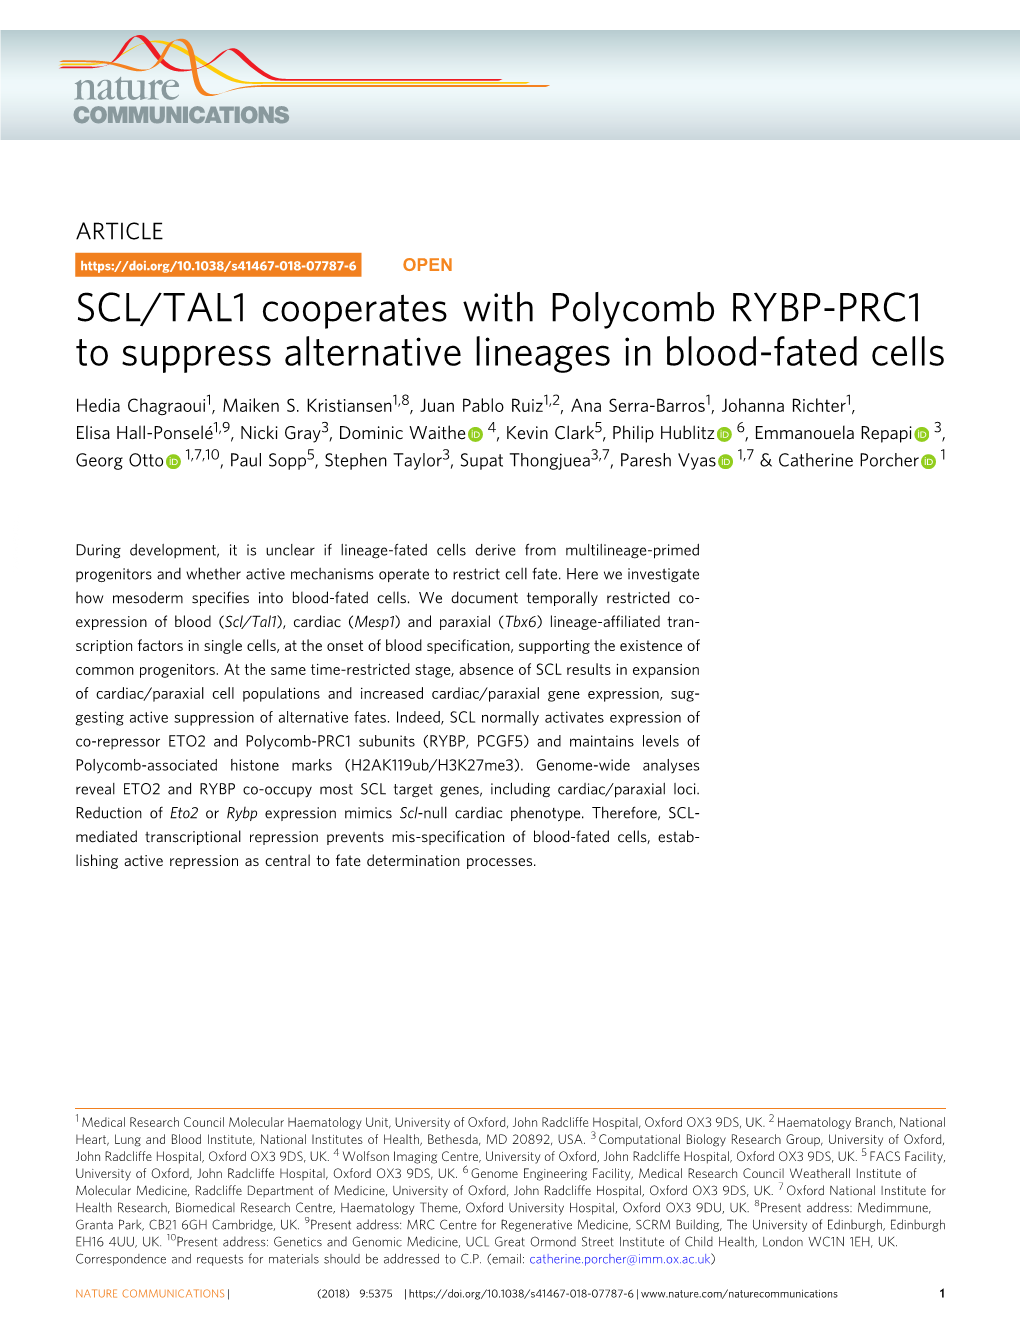 SCL/TAL1 Cooperates with Polycomb RYBP-PRC1 to Suppress Alternative Lineages in Blood-Fated Cells